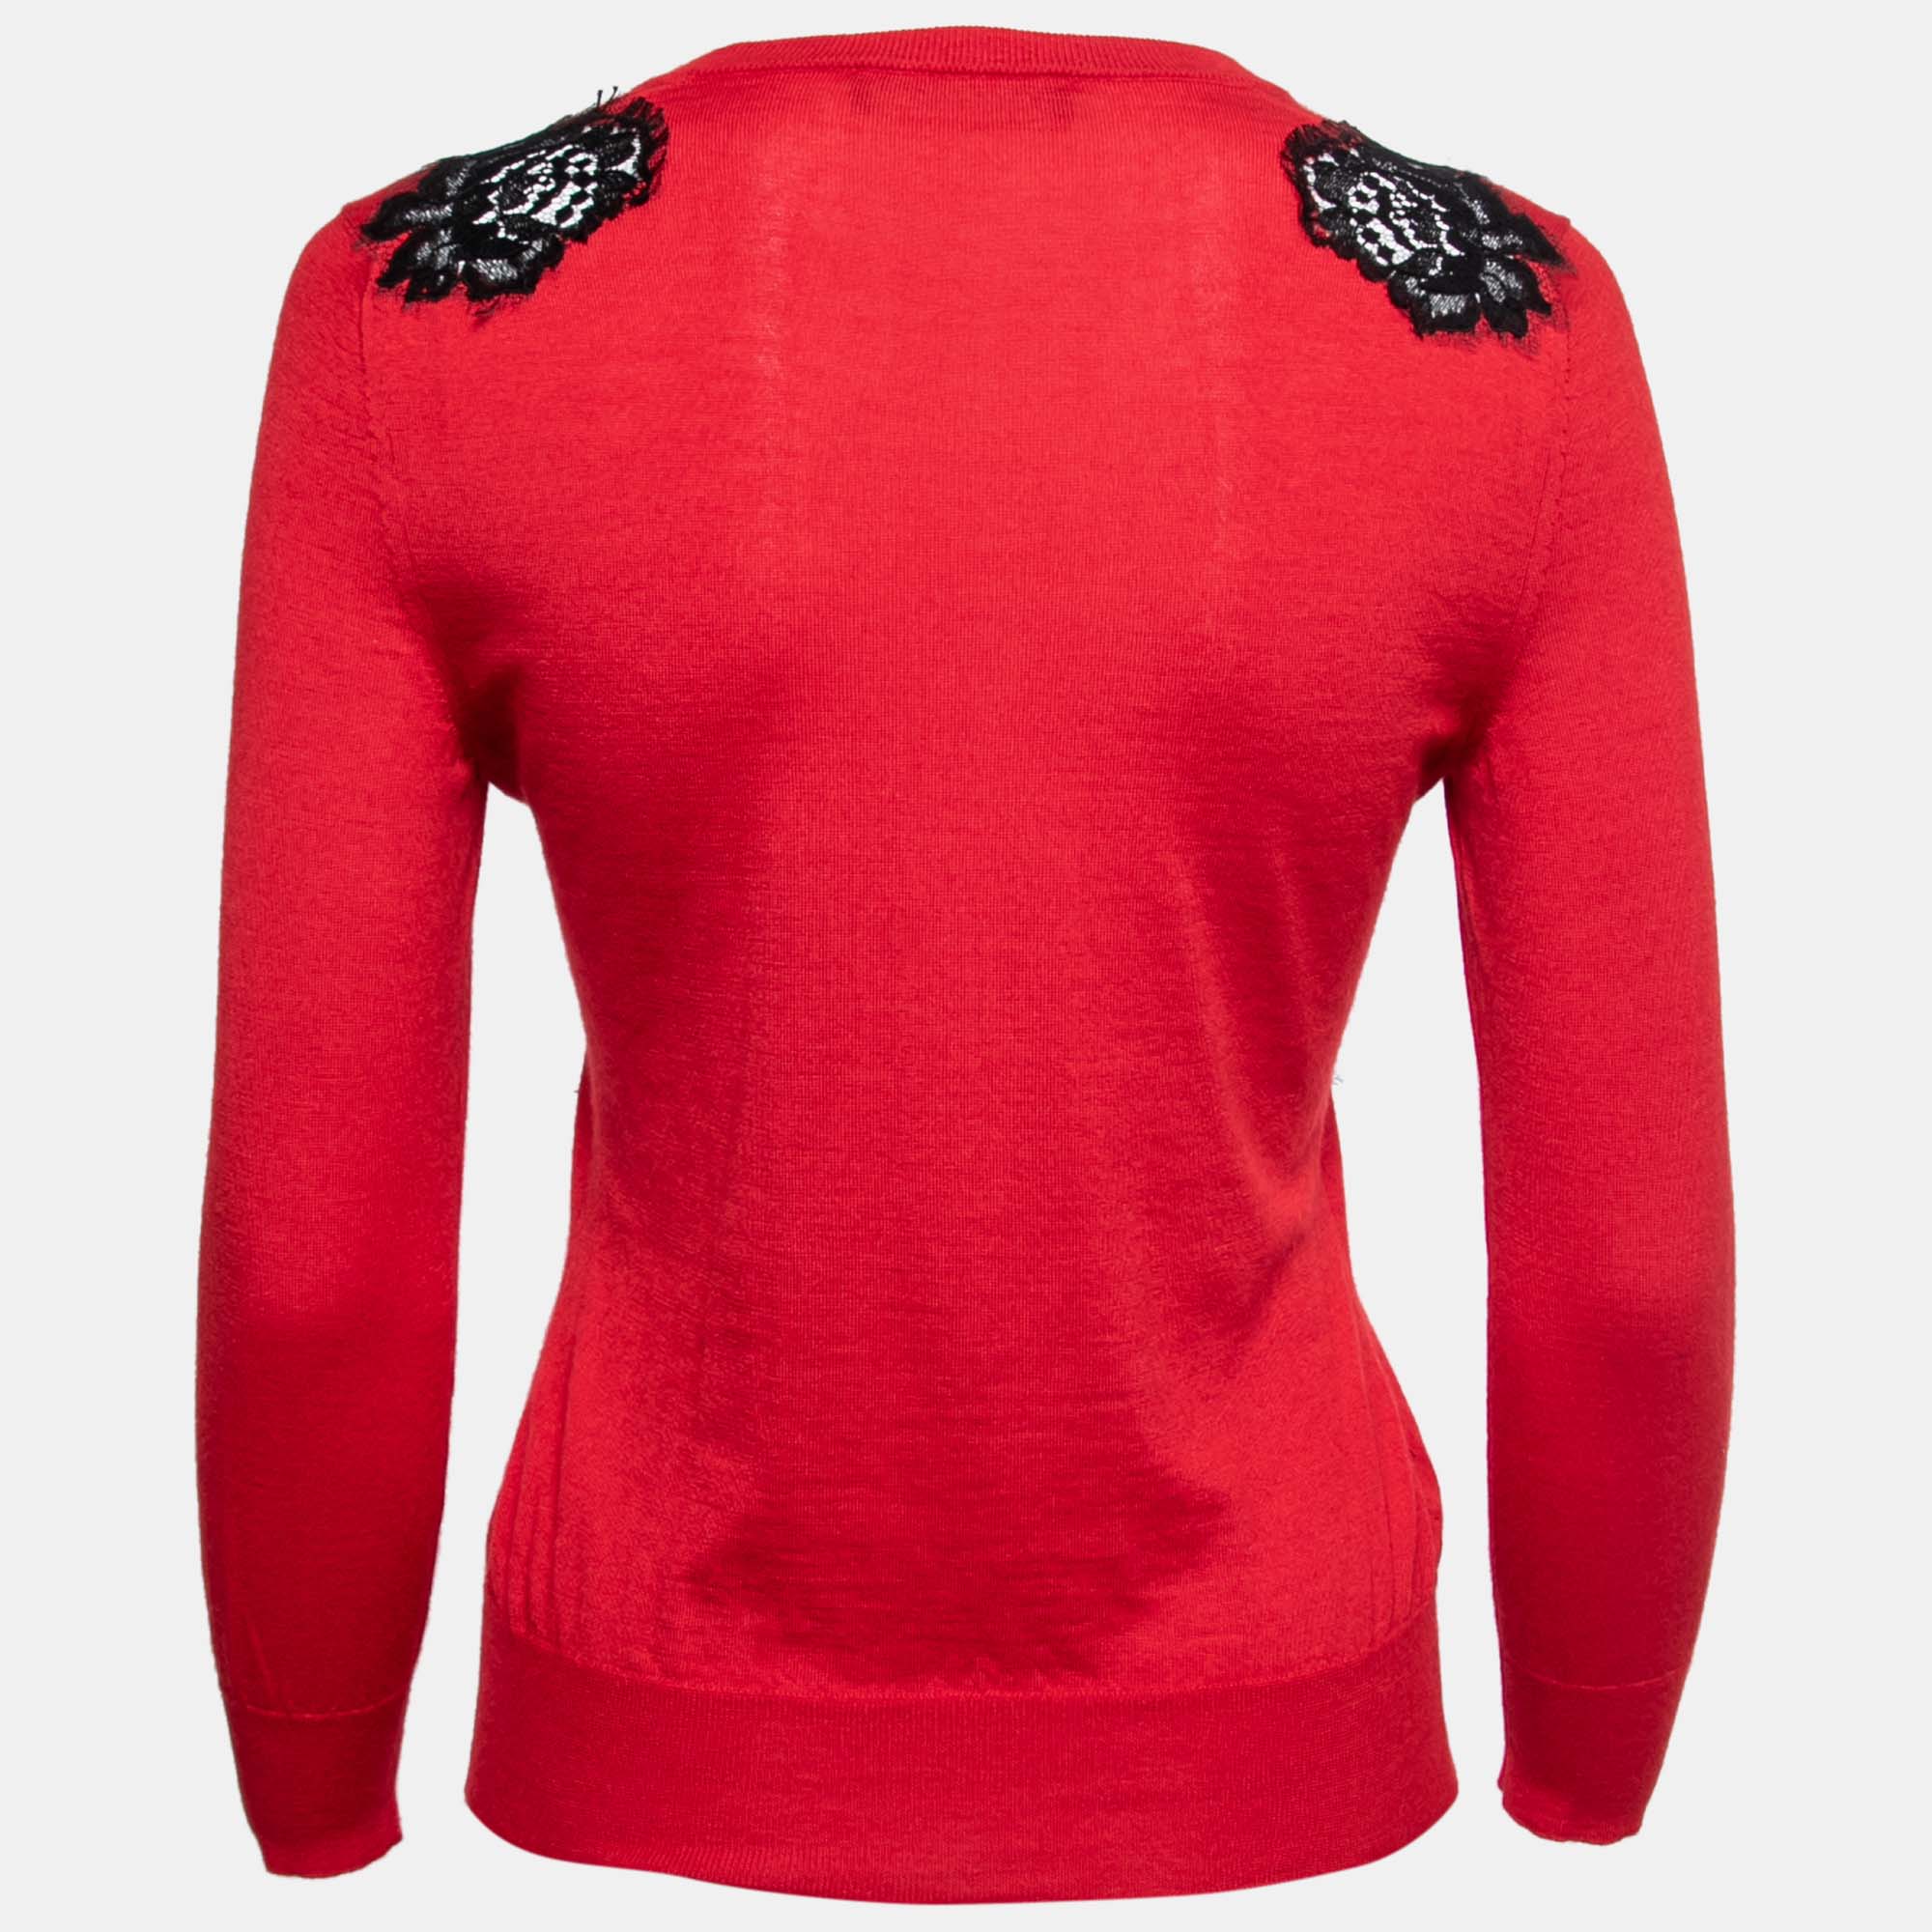 

Dolce & Gabbana Red Cashmere & Lace Inset Round Neck Jumper